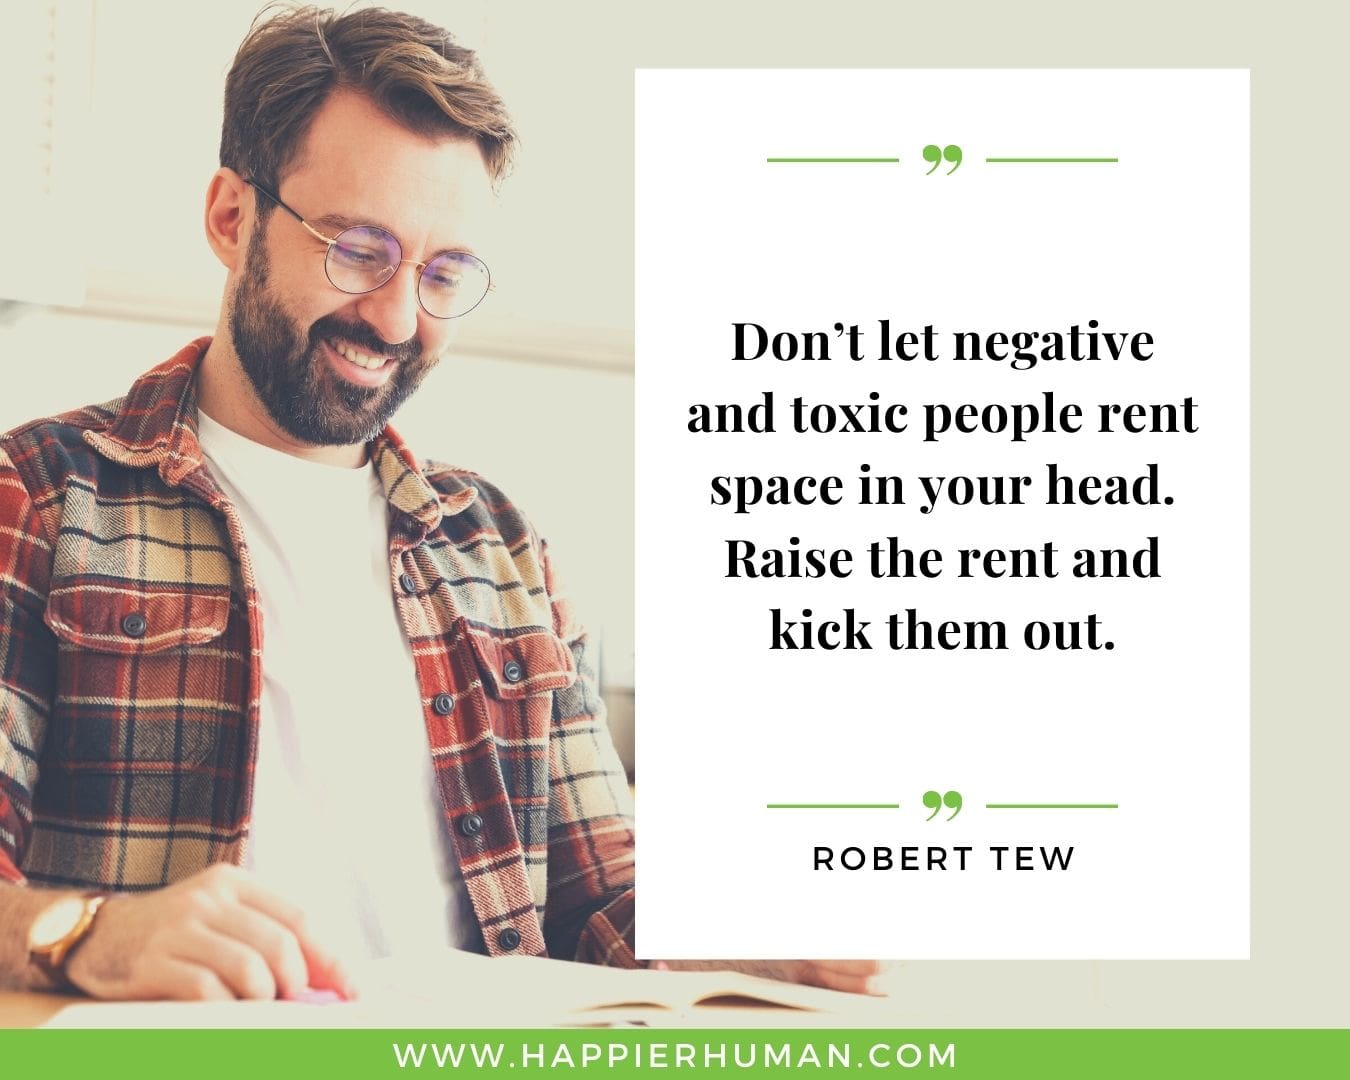 Toxic People Quotes - “Don’t let negative and toxic people rent space in your head. Raise the rent and kick them out.” – Robert Tew